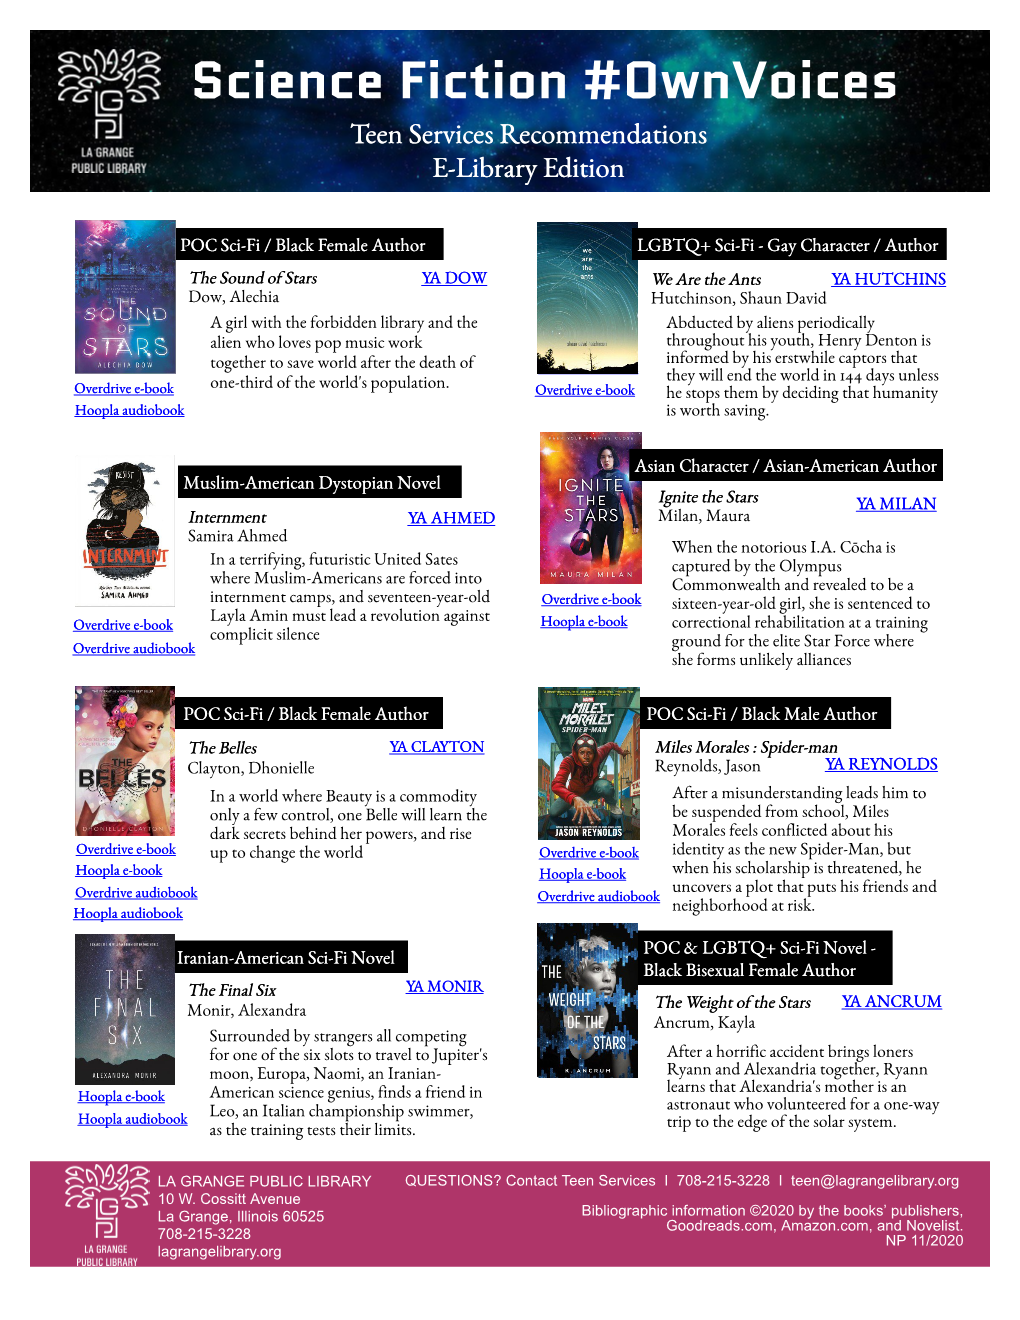 Science Fiction #Ownvoices Teen Services Recommendations E-Library Edition